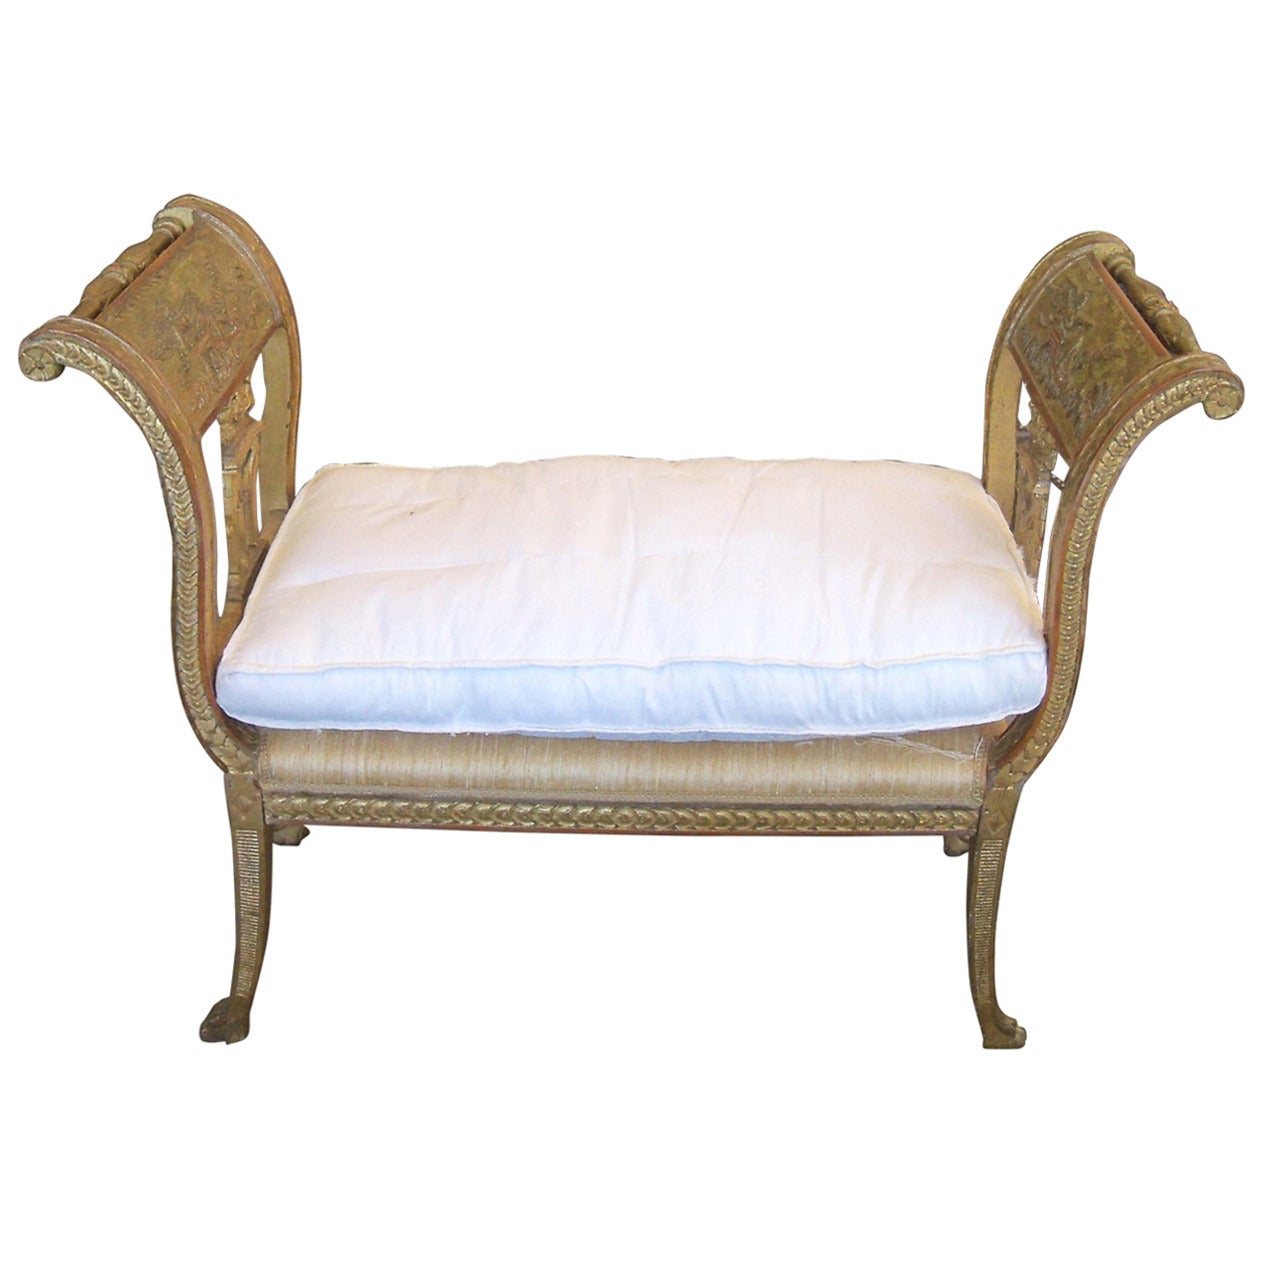 19th Century Neoclassical Style Carved Paint & Giltwood Bench with Cushion For Sale